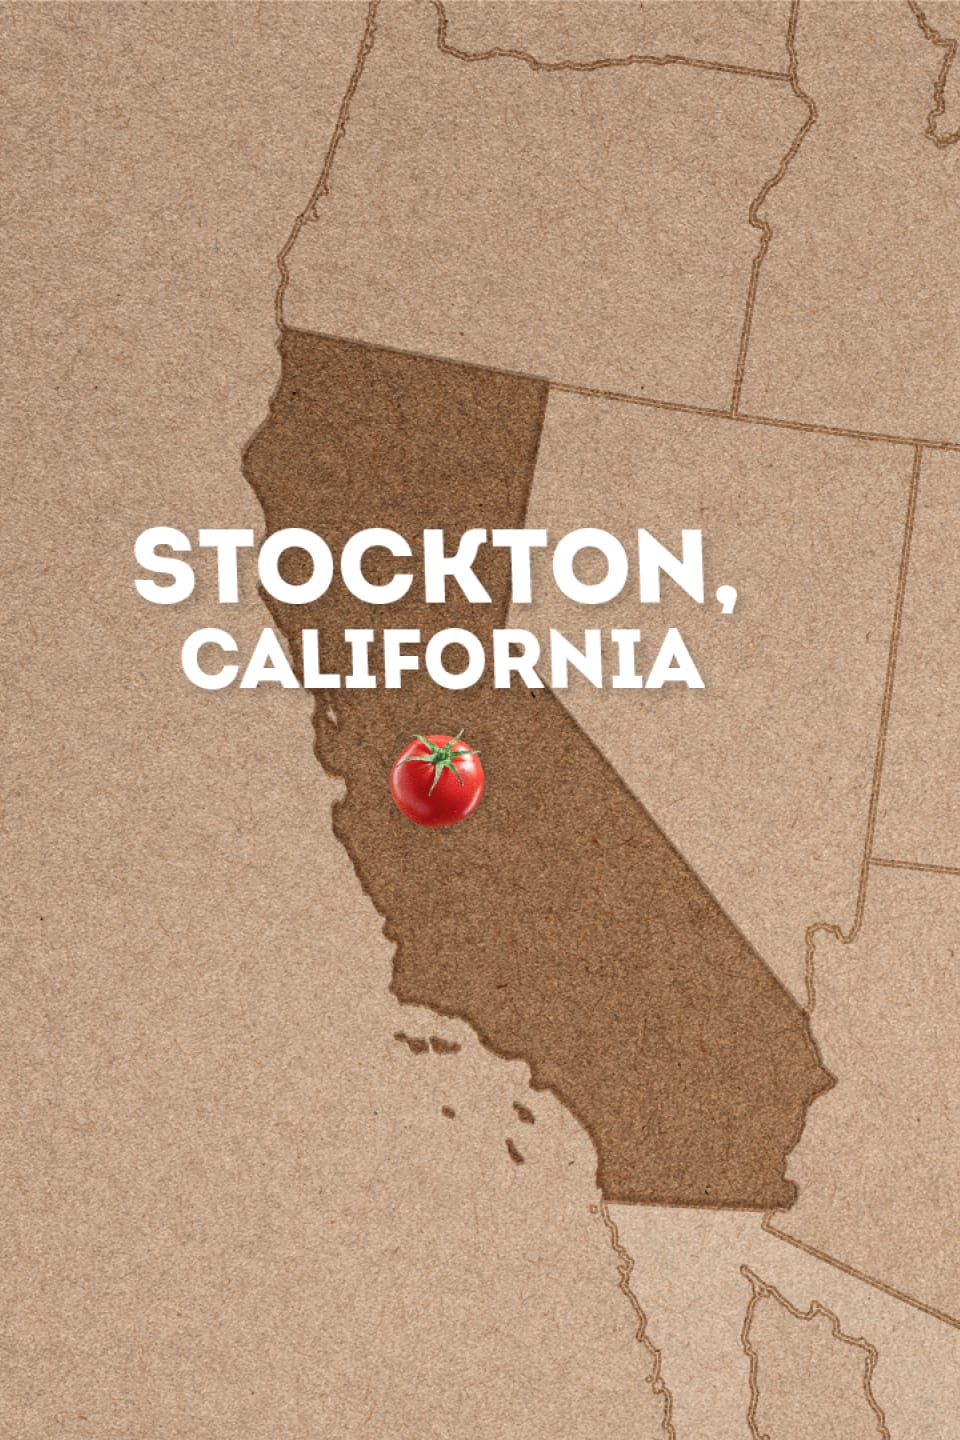 An abstract map of Stockton, California, where we alternated Heinz tomatoes with other sustainable crops to protect the soil.